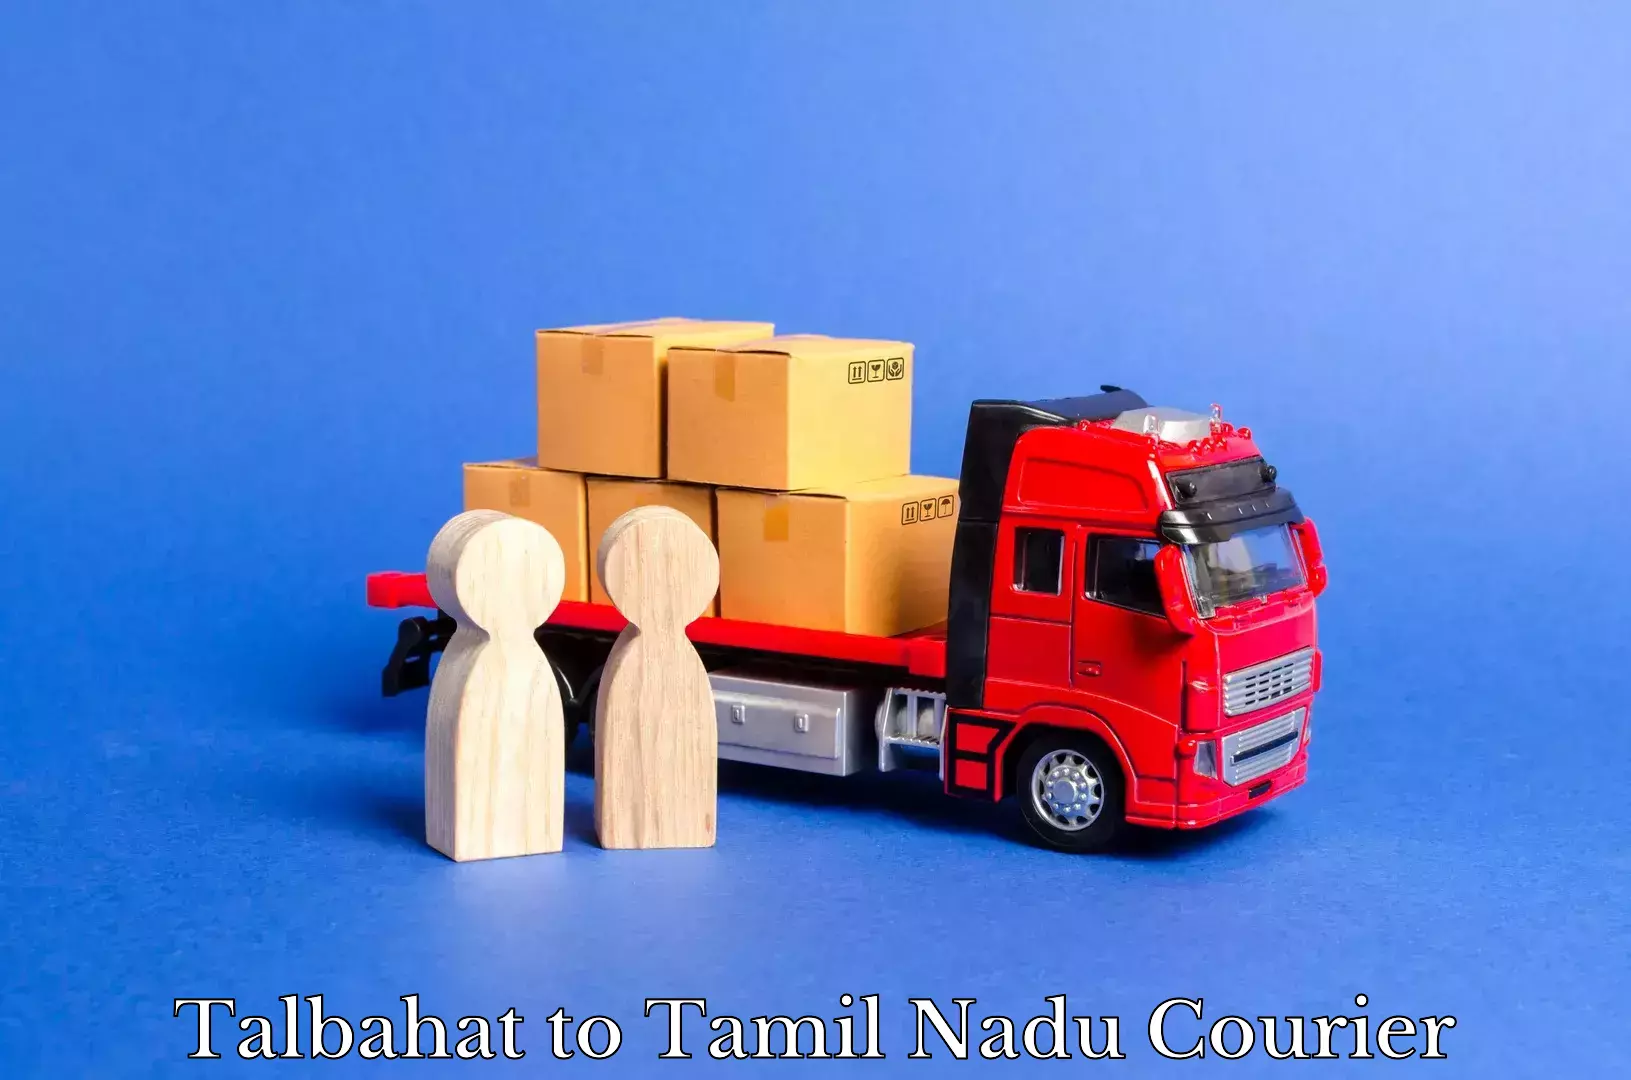 Global freight services Talbahat to Tamil Nadu